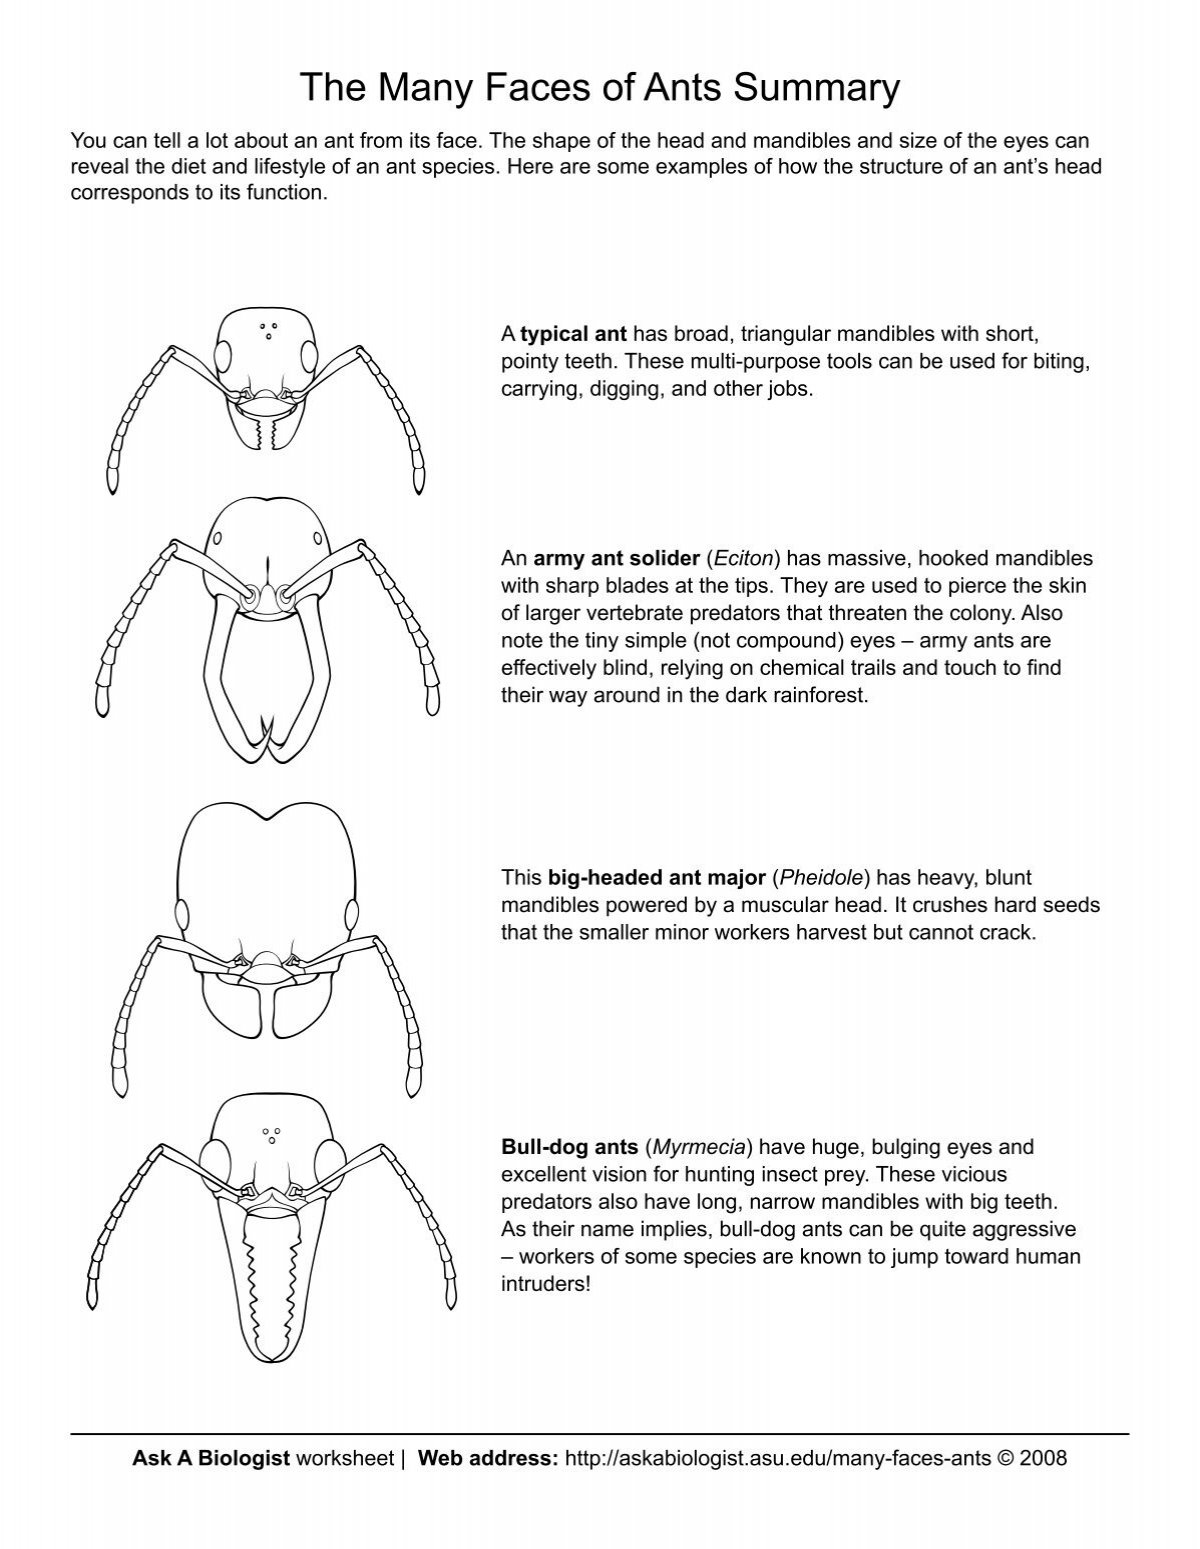 Ask A Biologist The Many Faces of Ants Matching Activity Worksheet